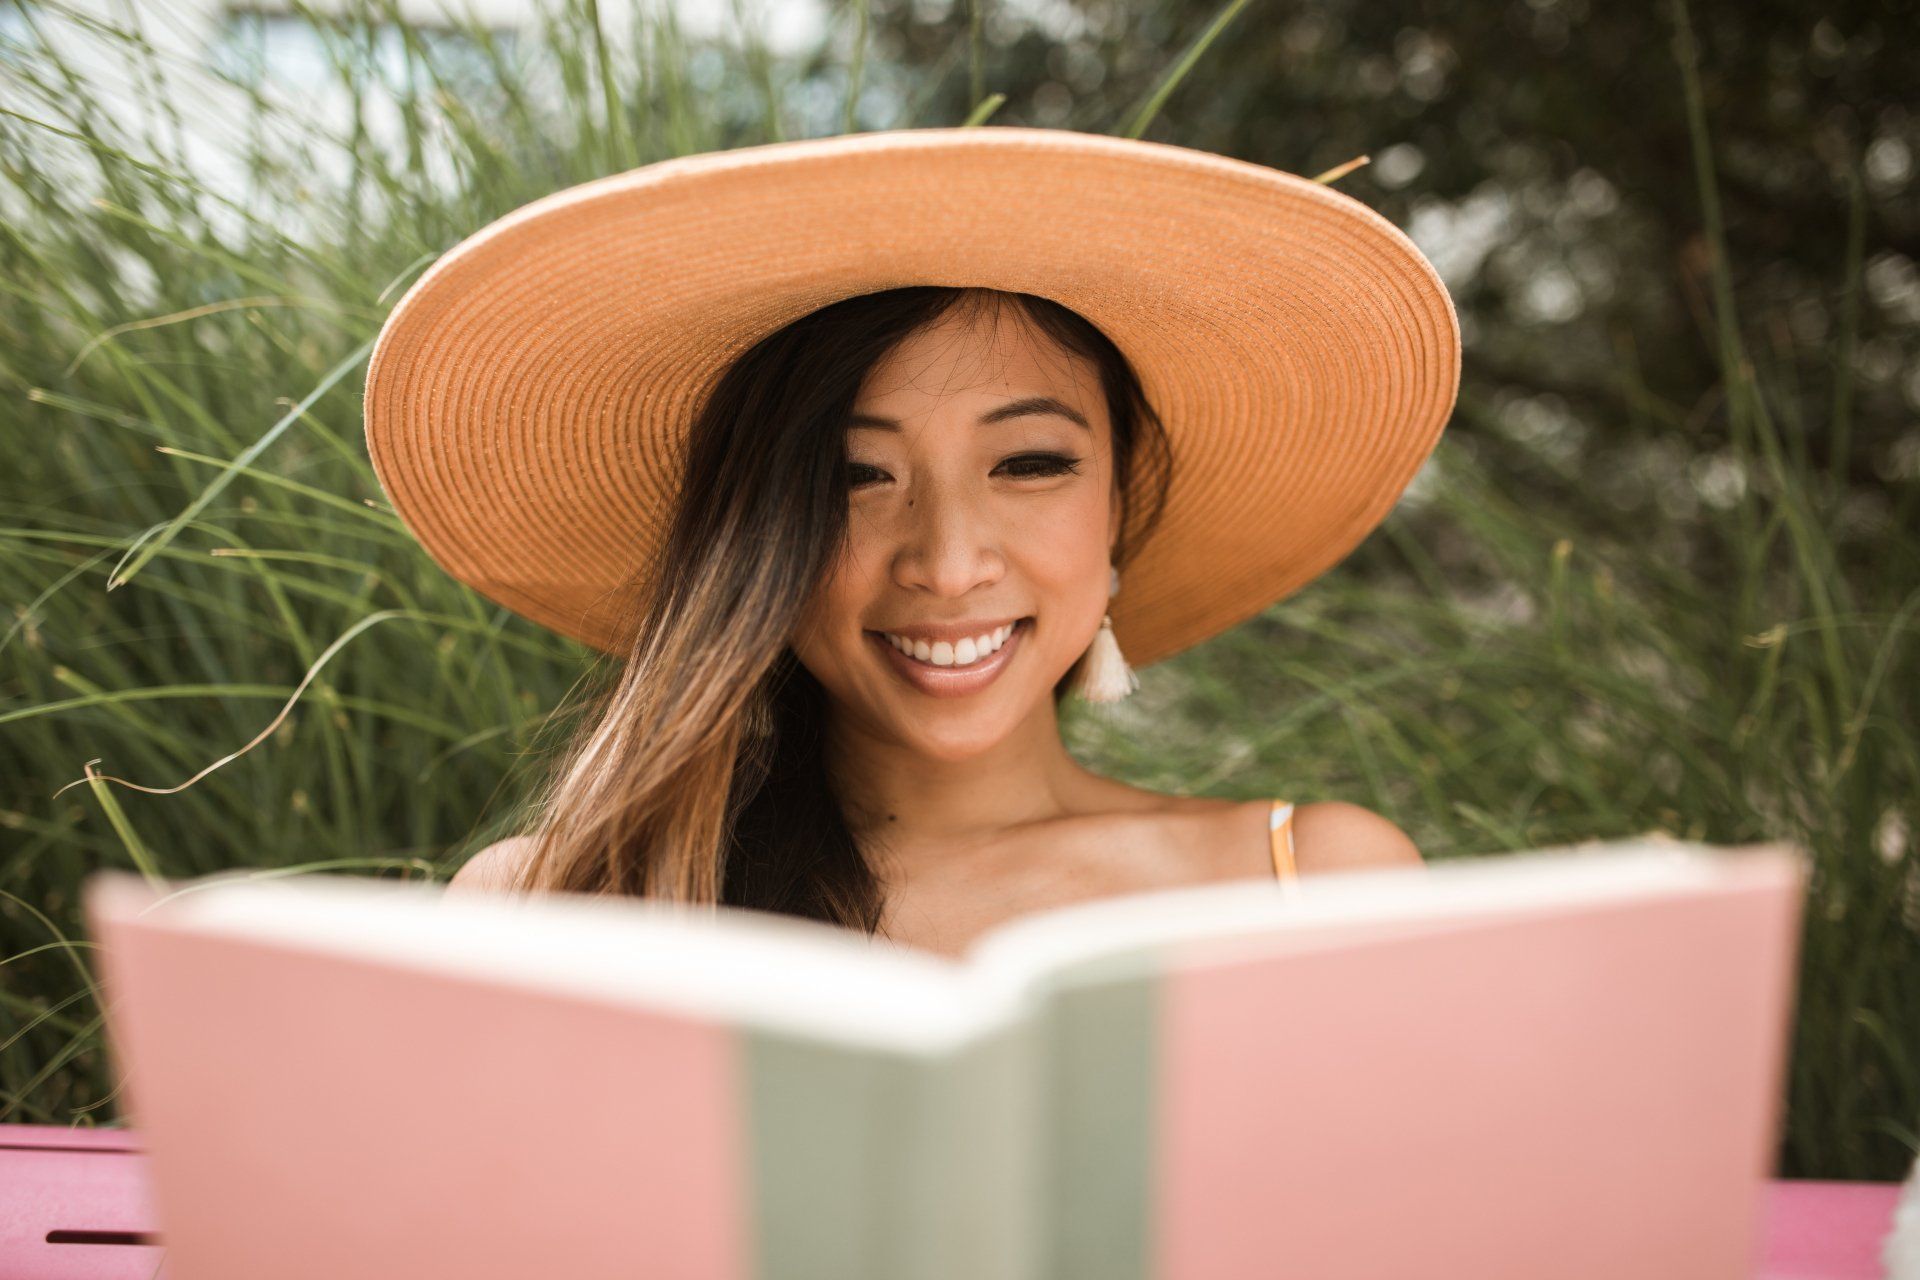 A woman wearing a hat is reading a book on how to purchase a home in Santa Cruz.